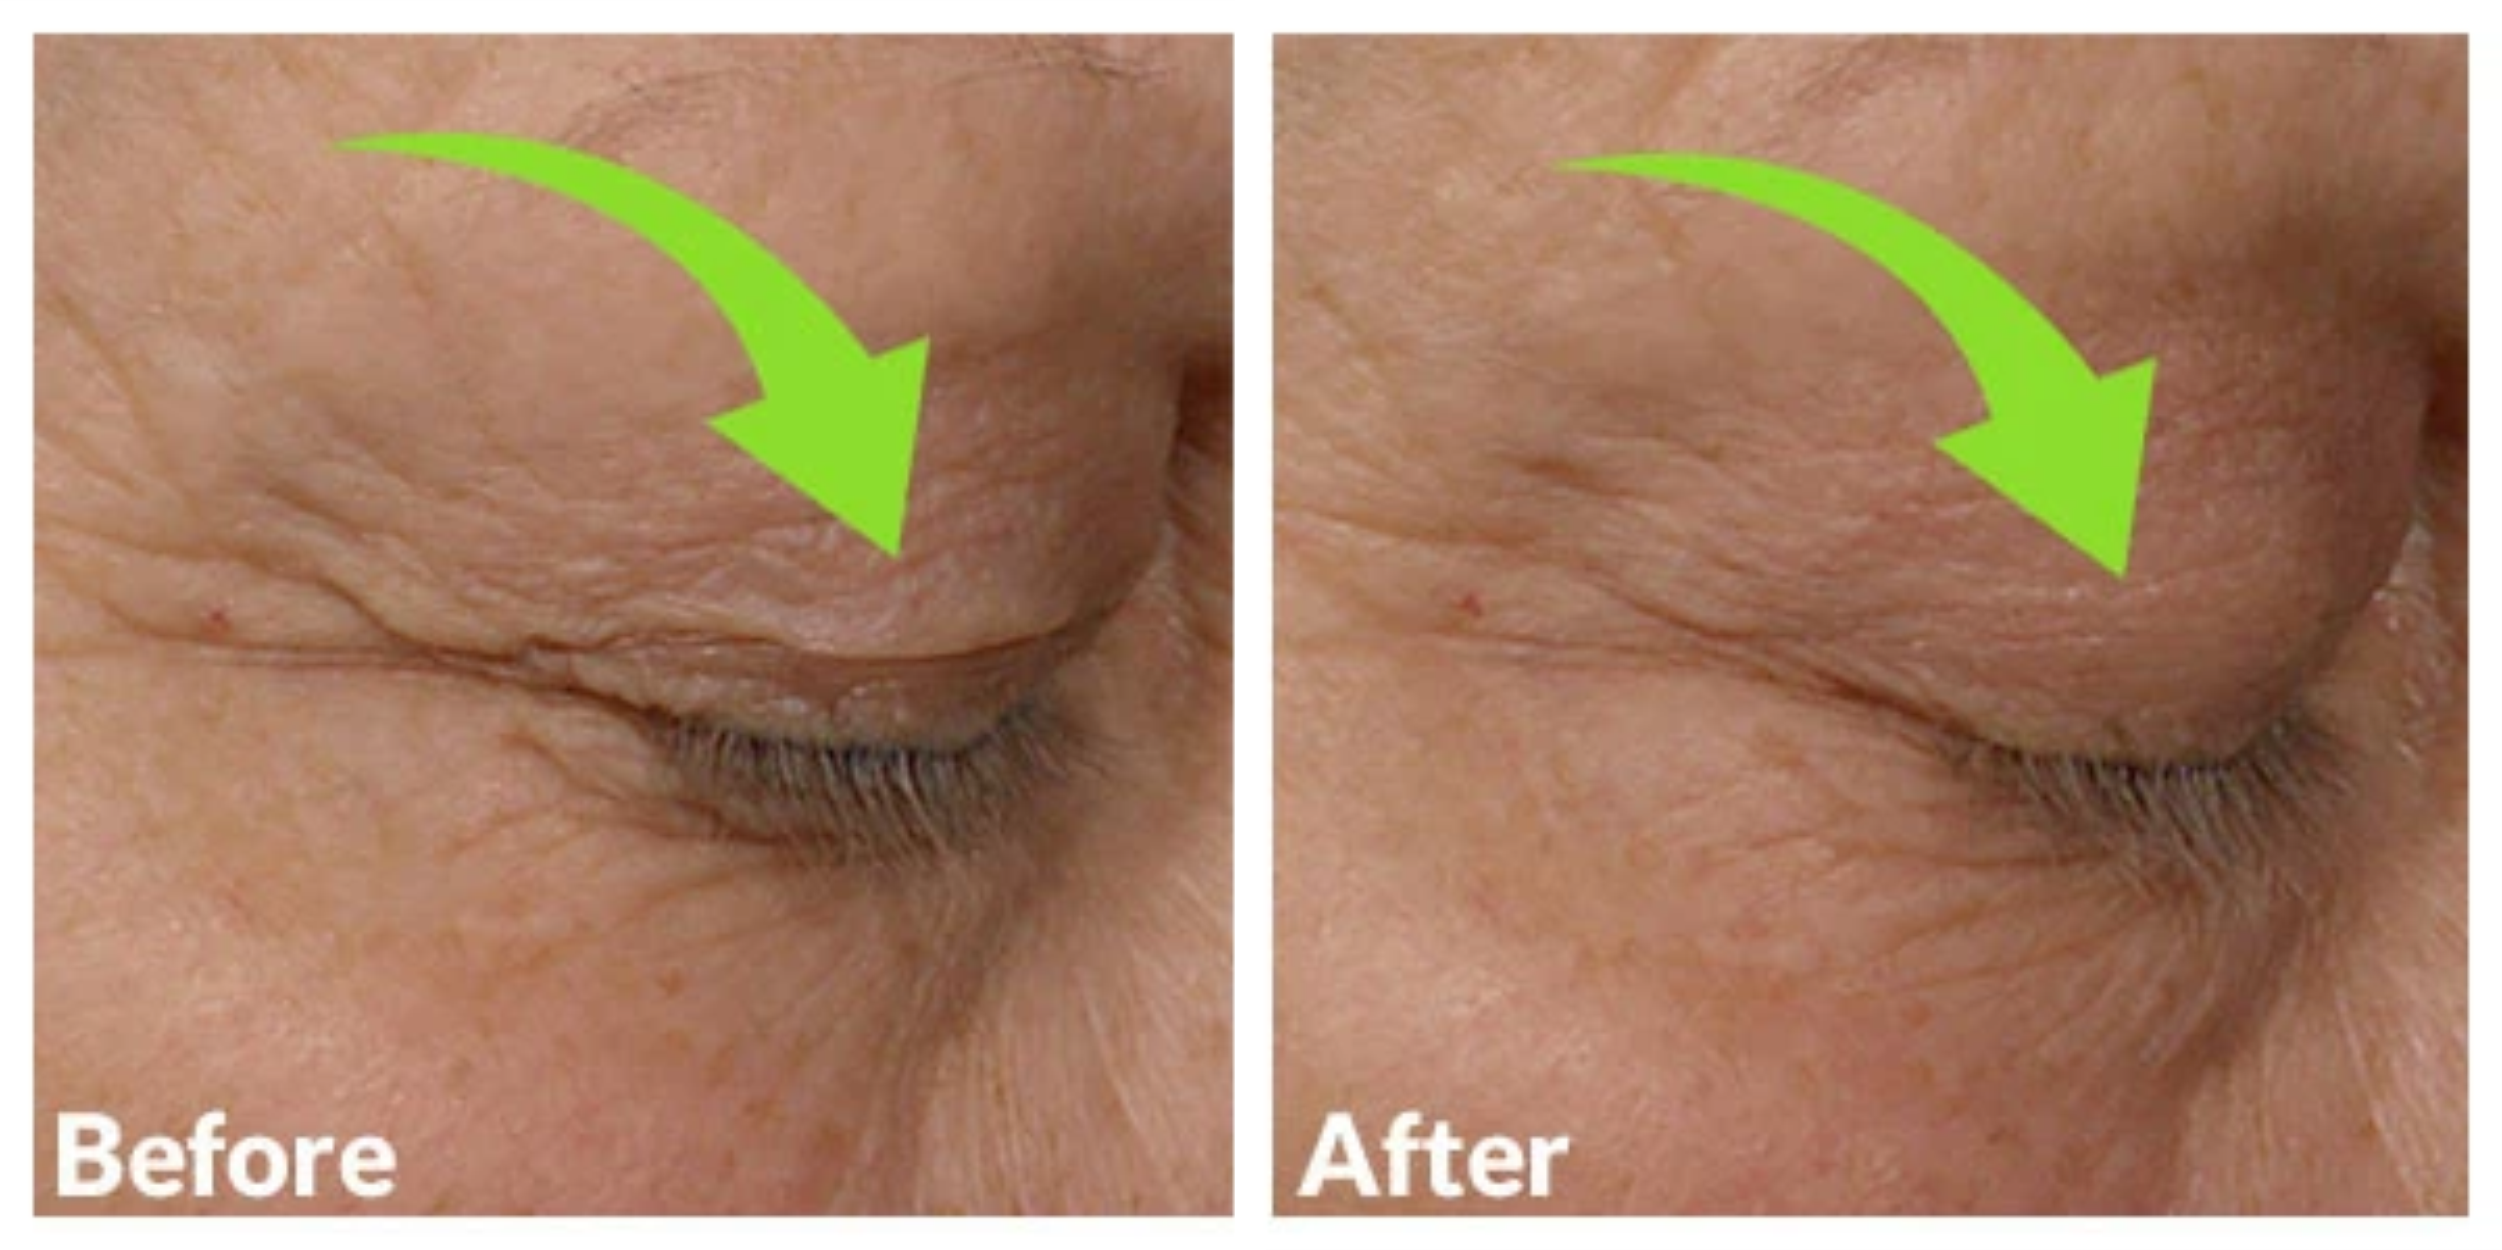 Before and After Eyelids Image Side View